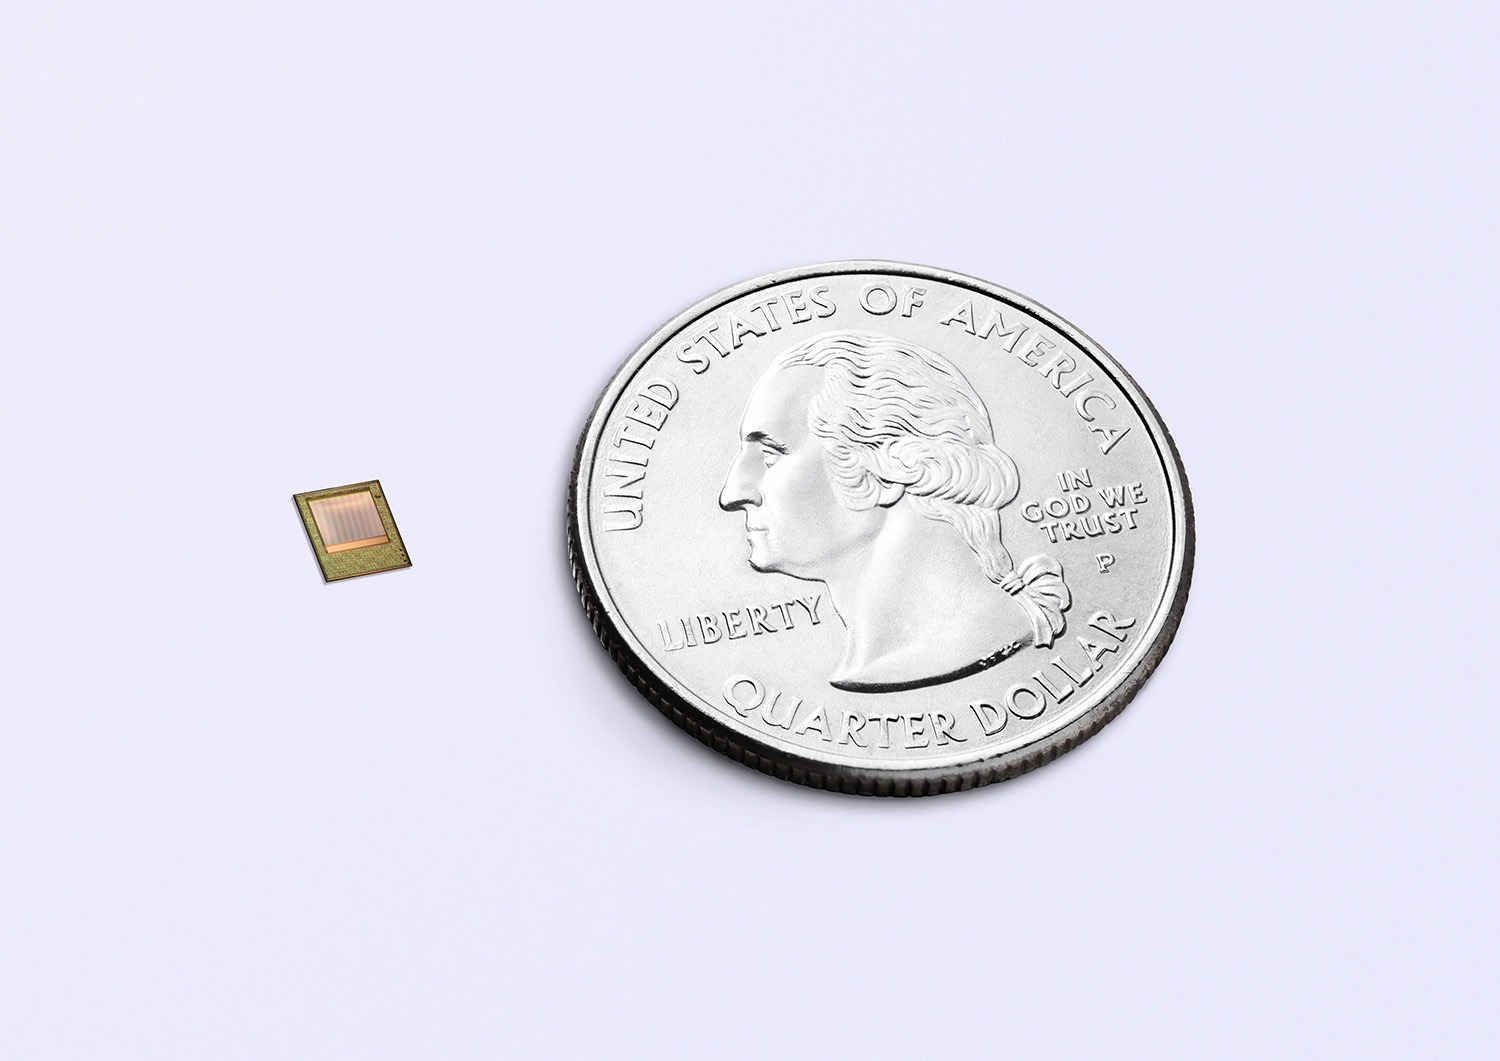 pmdtechnolgies AG Infineon has developed a new 3D image sensor in its REAL3 chip family